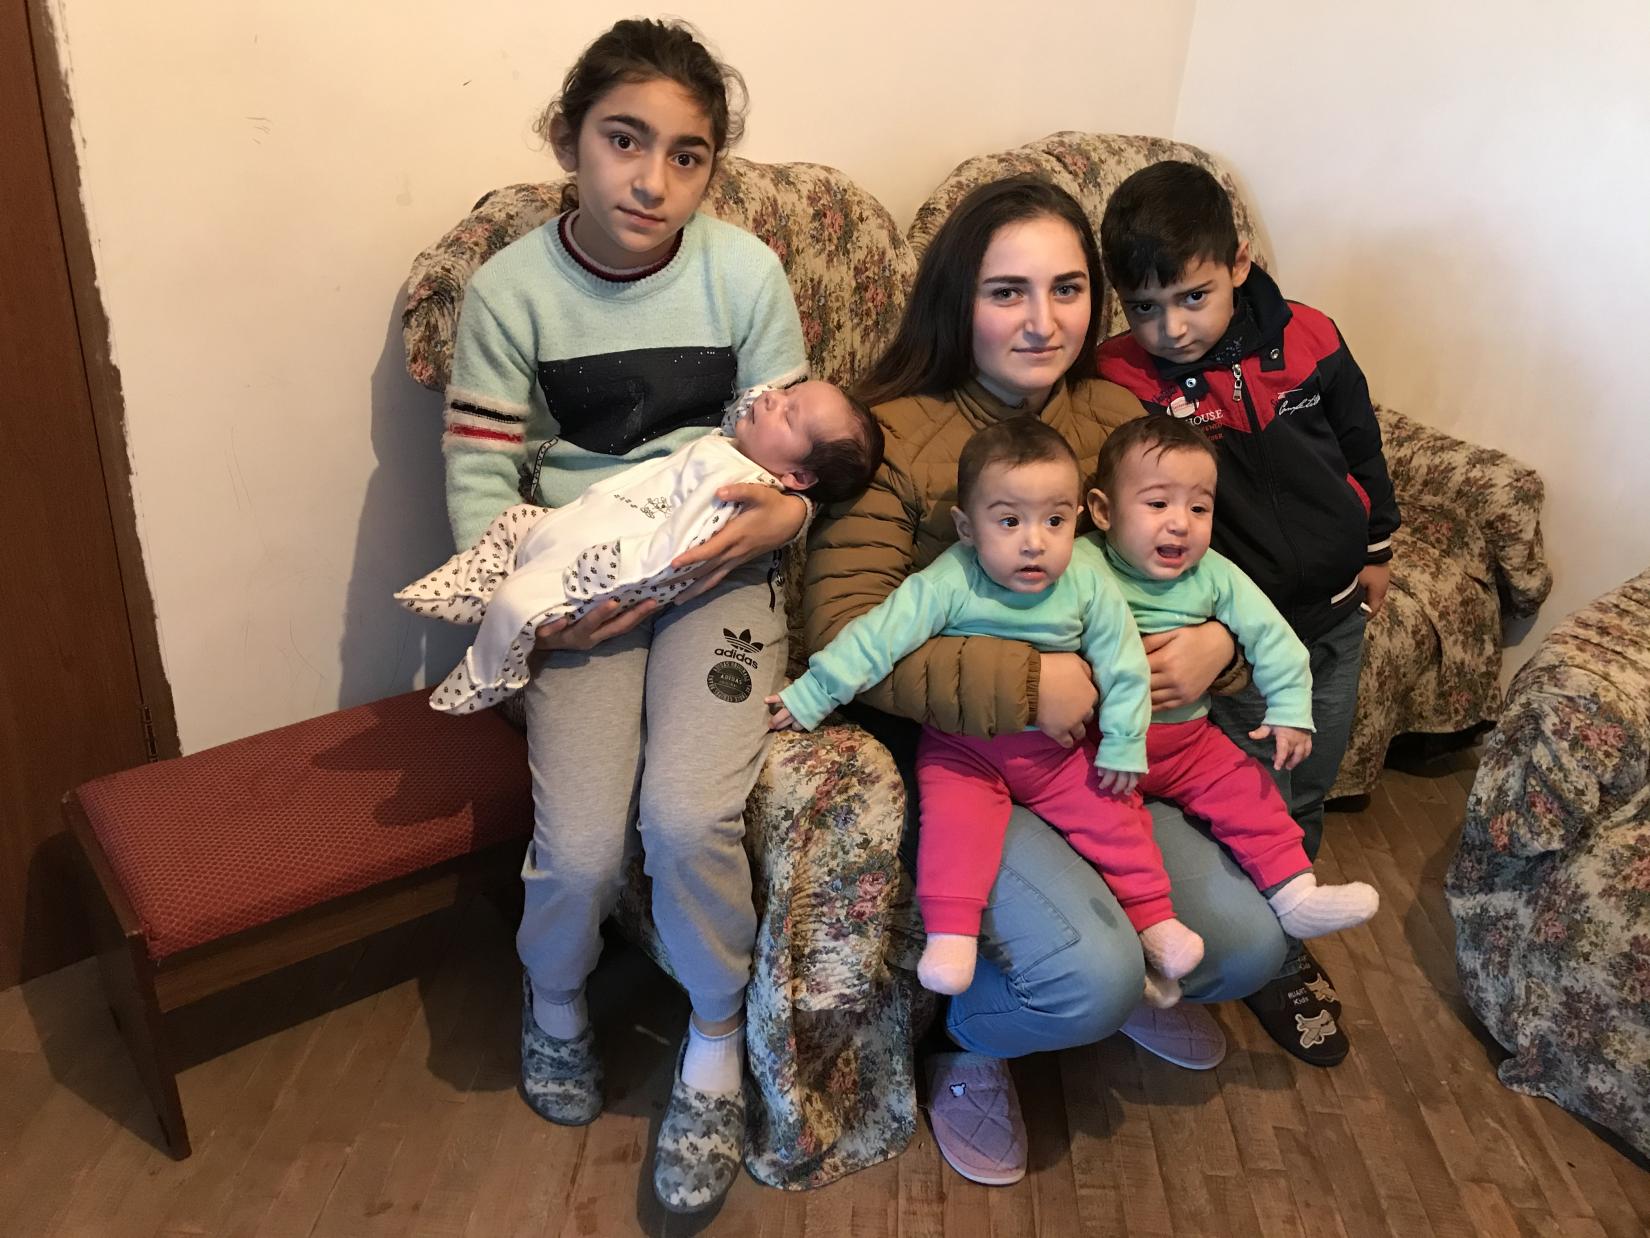 Members of an eighteen-person household in a refugee-like situation are hosted by a local family in a residential building in Kapan, Syunik Province, Armenia.